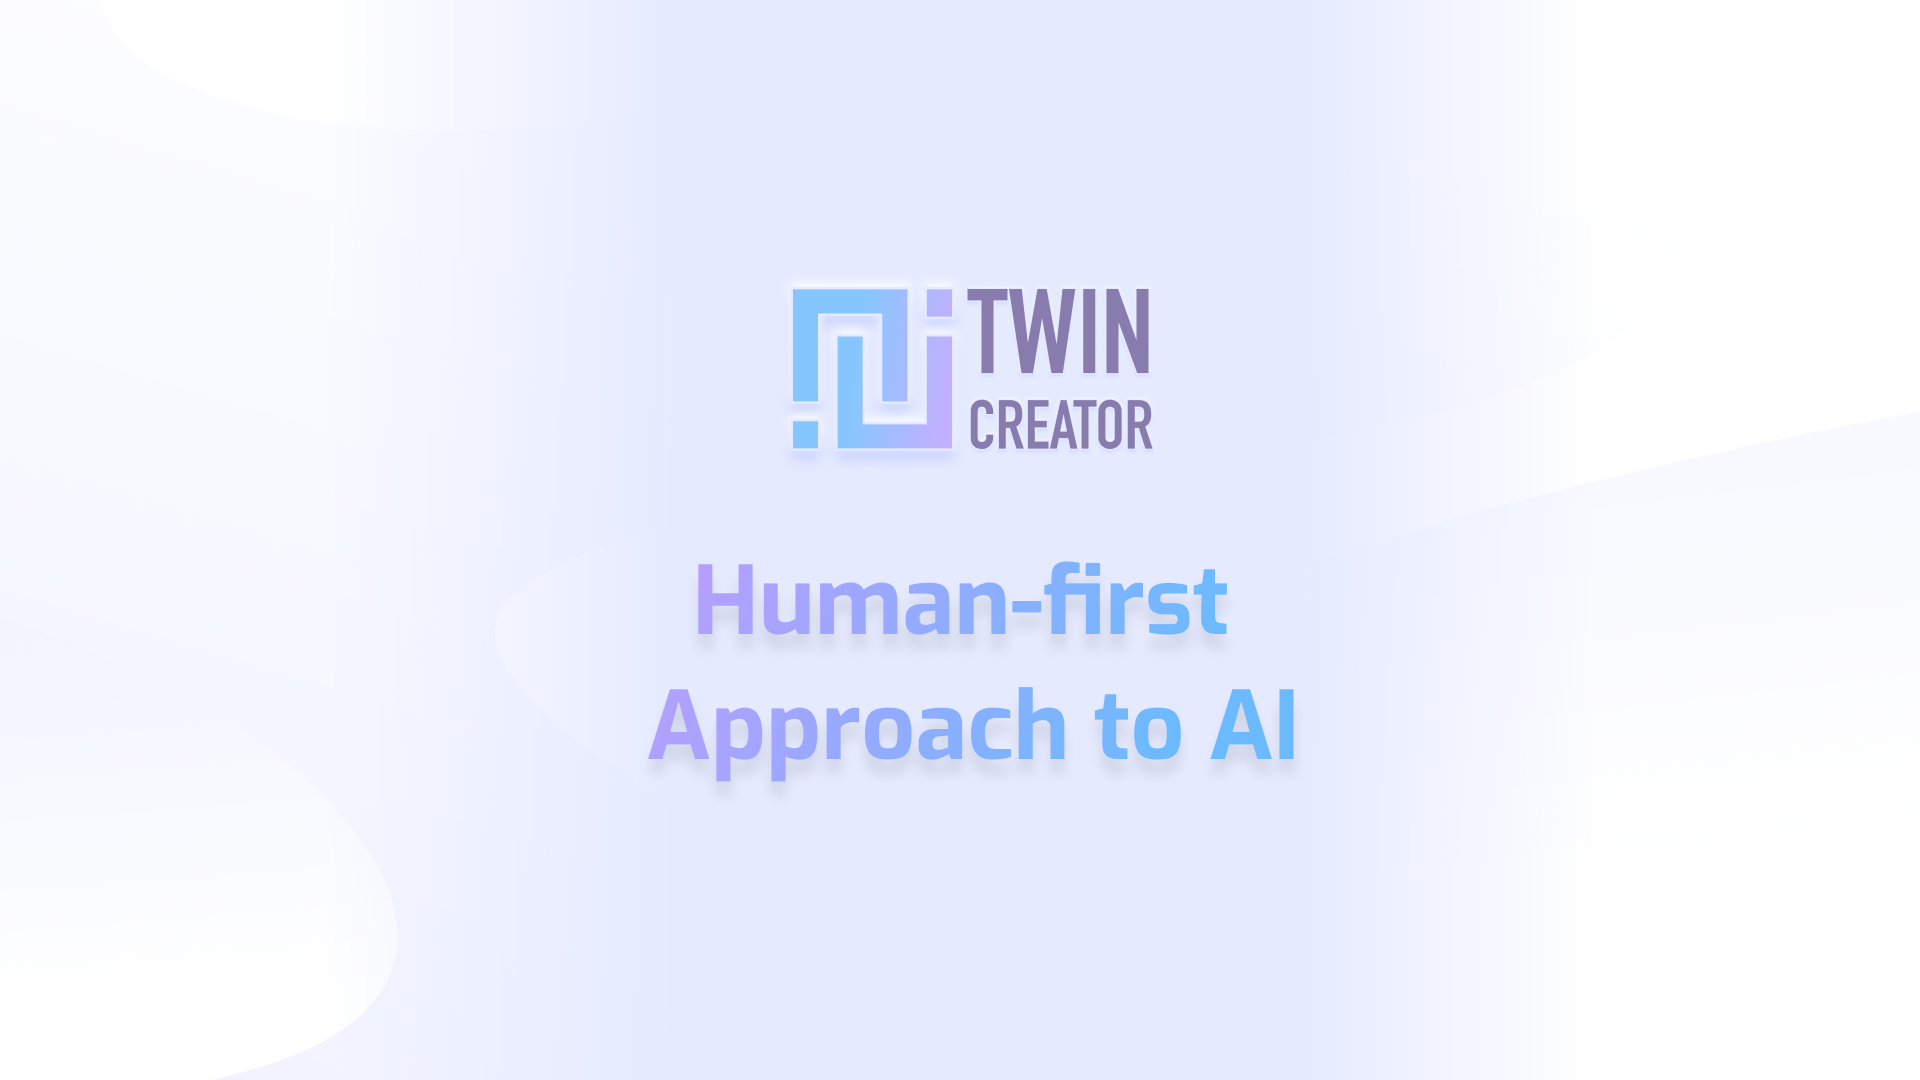 A human-first approach to generative AI